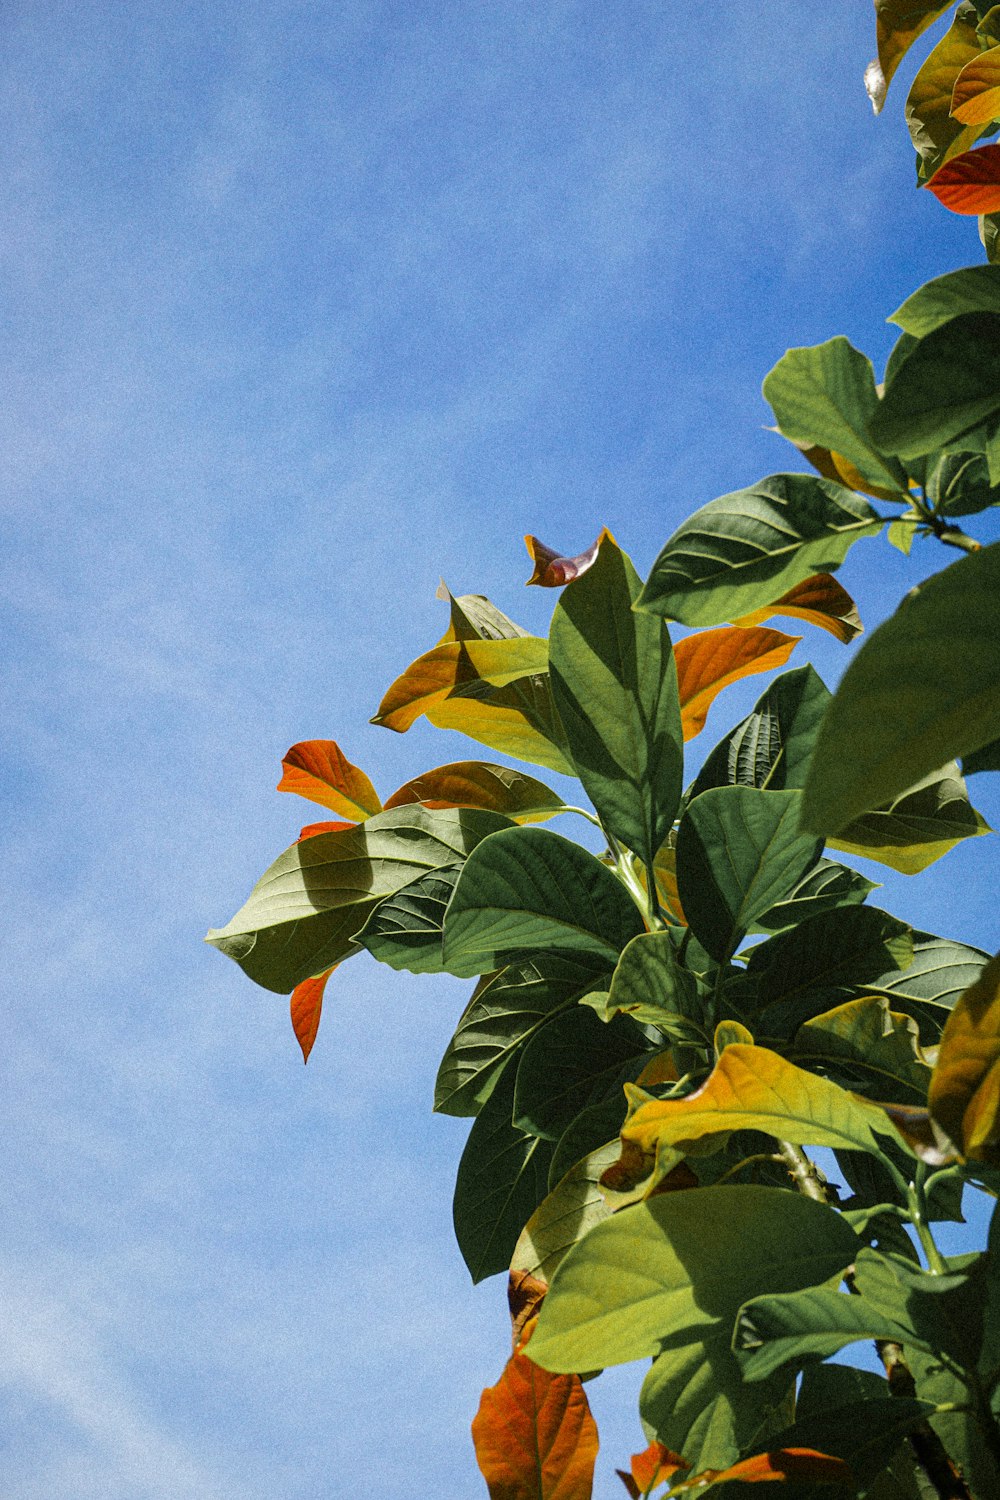 a leafy tree with a blue sky in the background